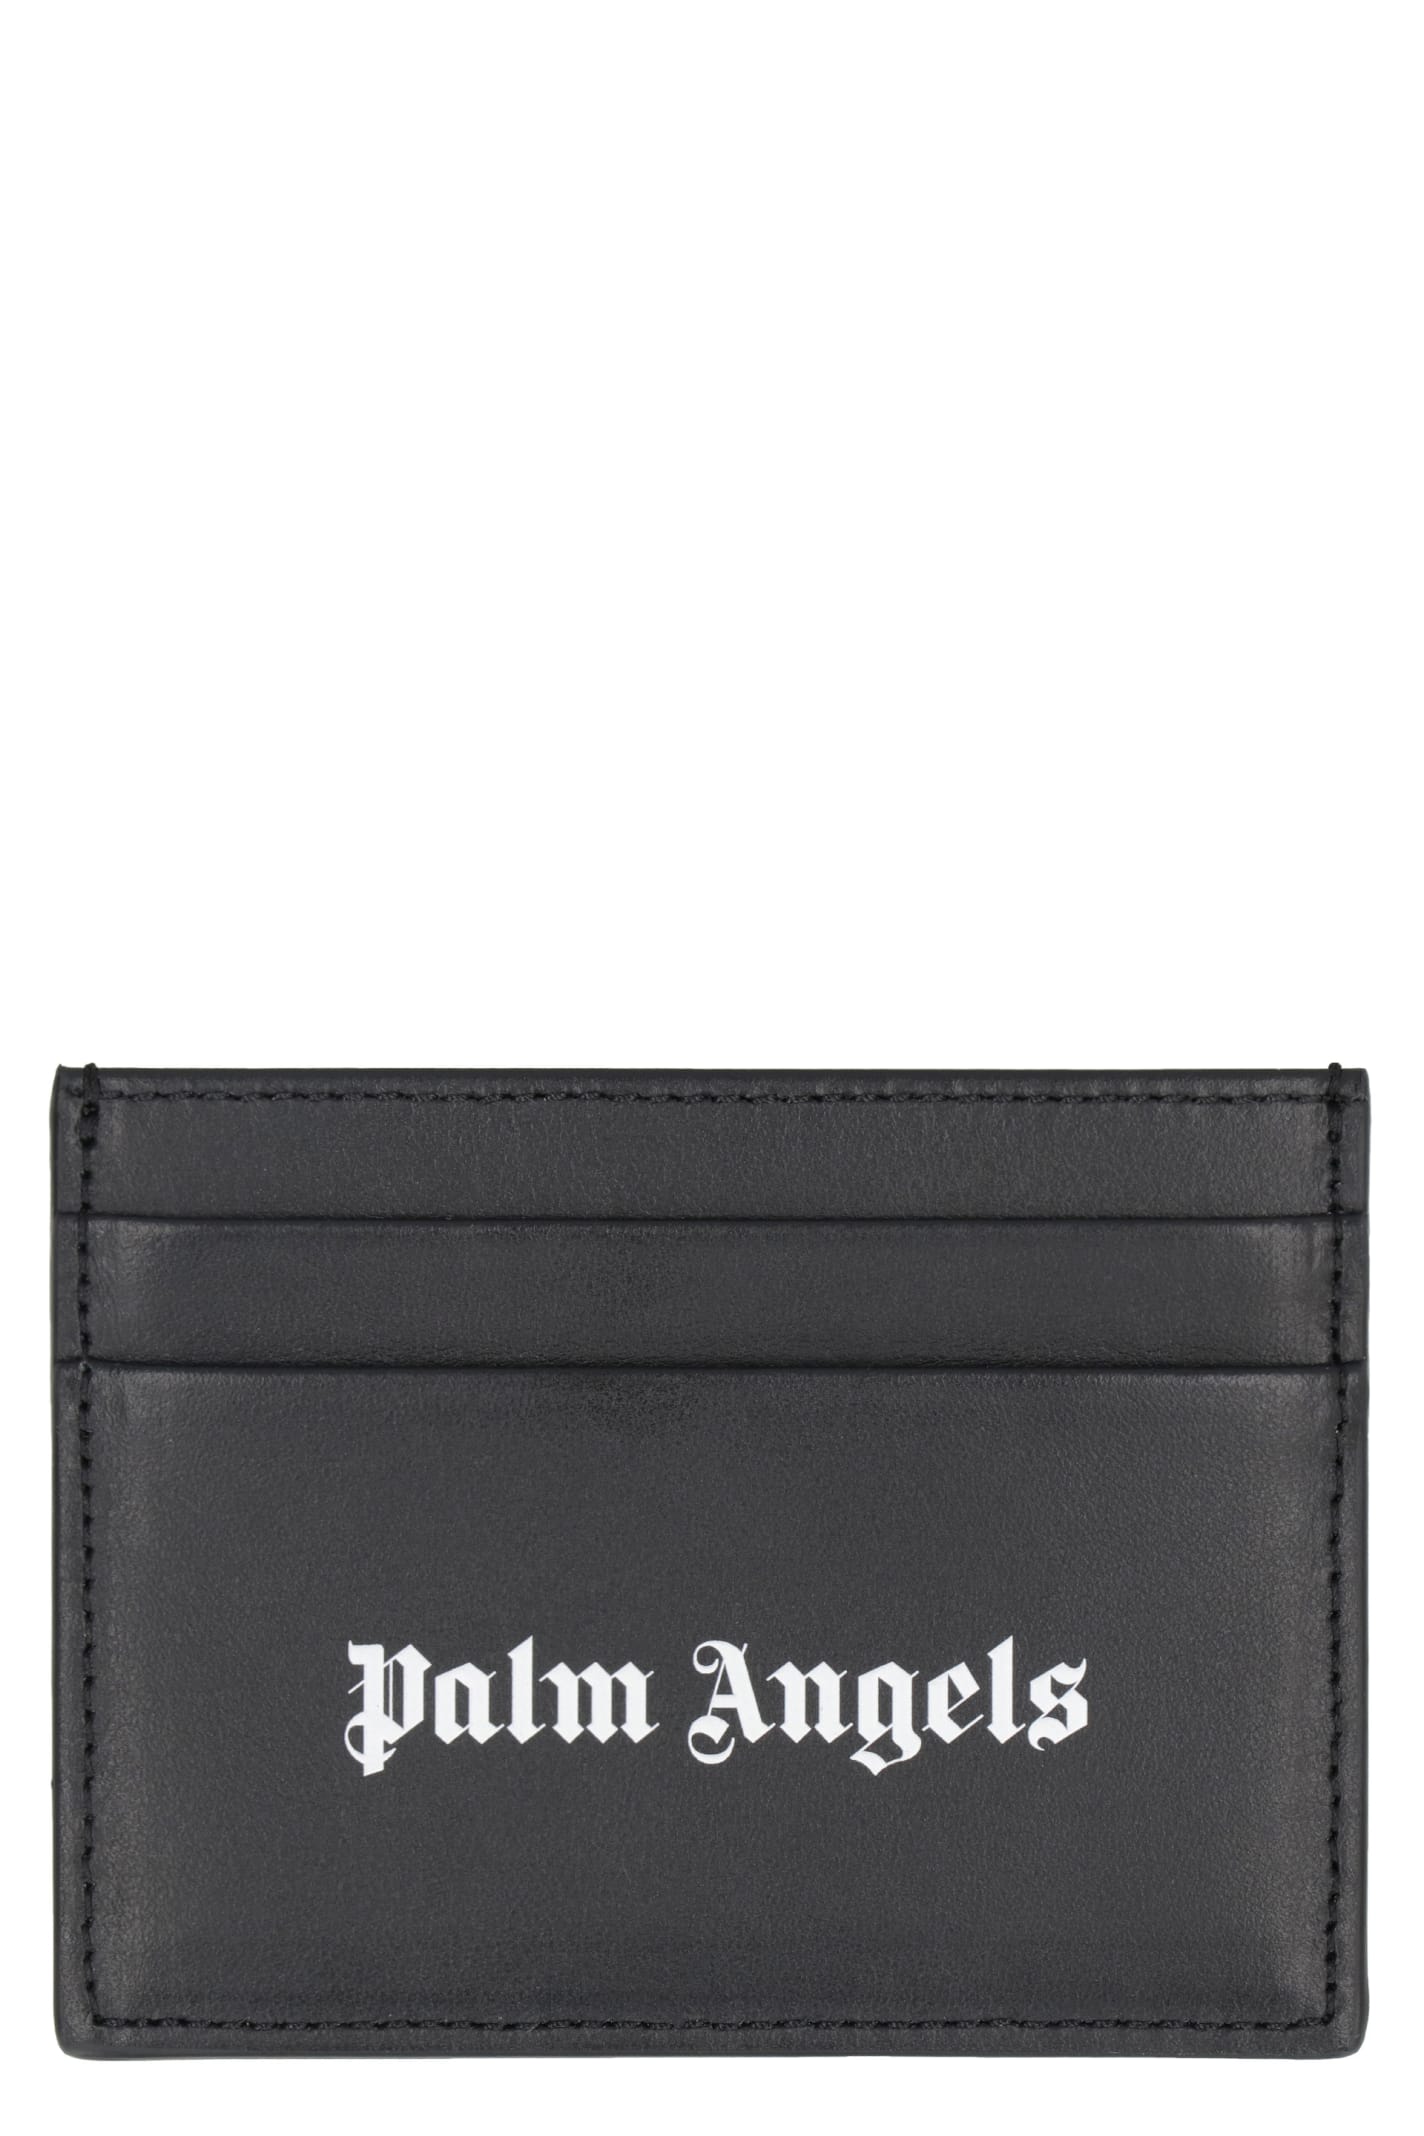 PALM ANGELS LEATHER CARD HOLDER